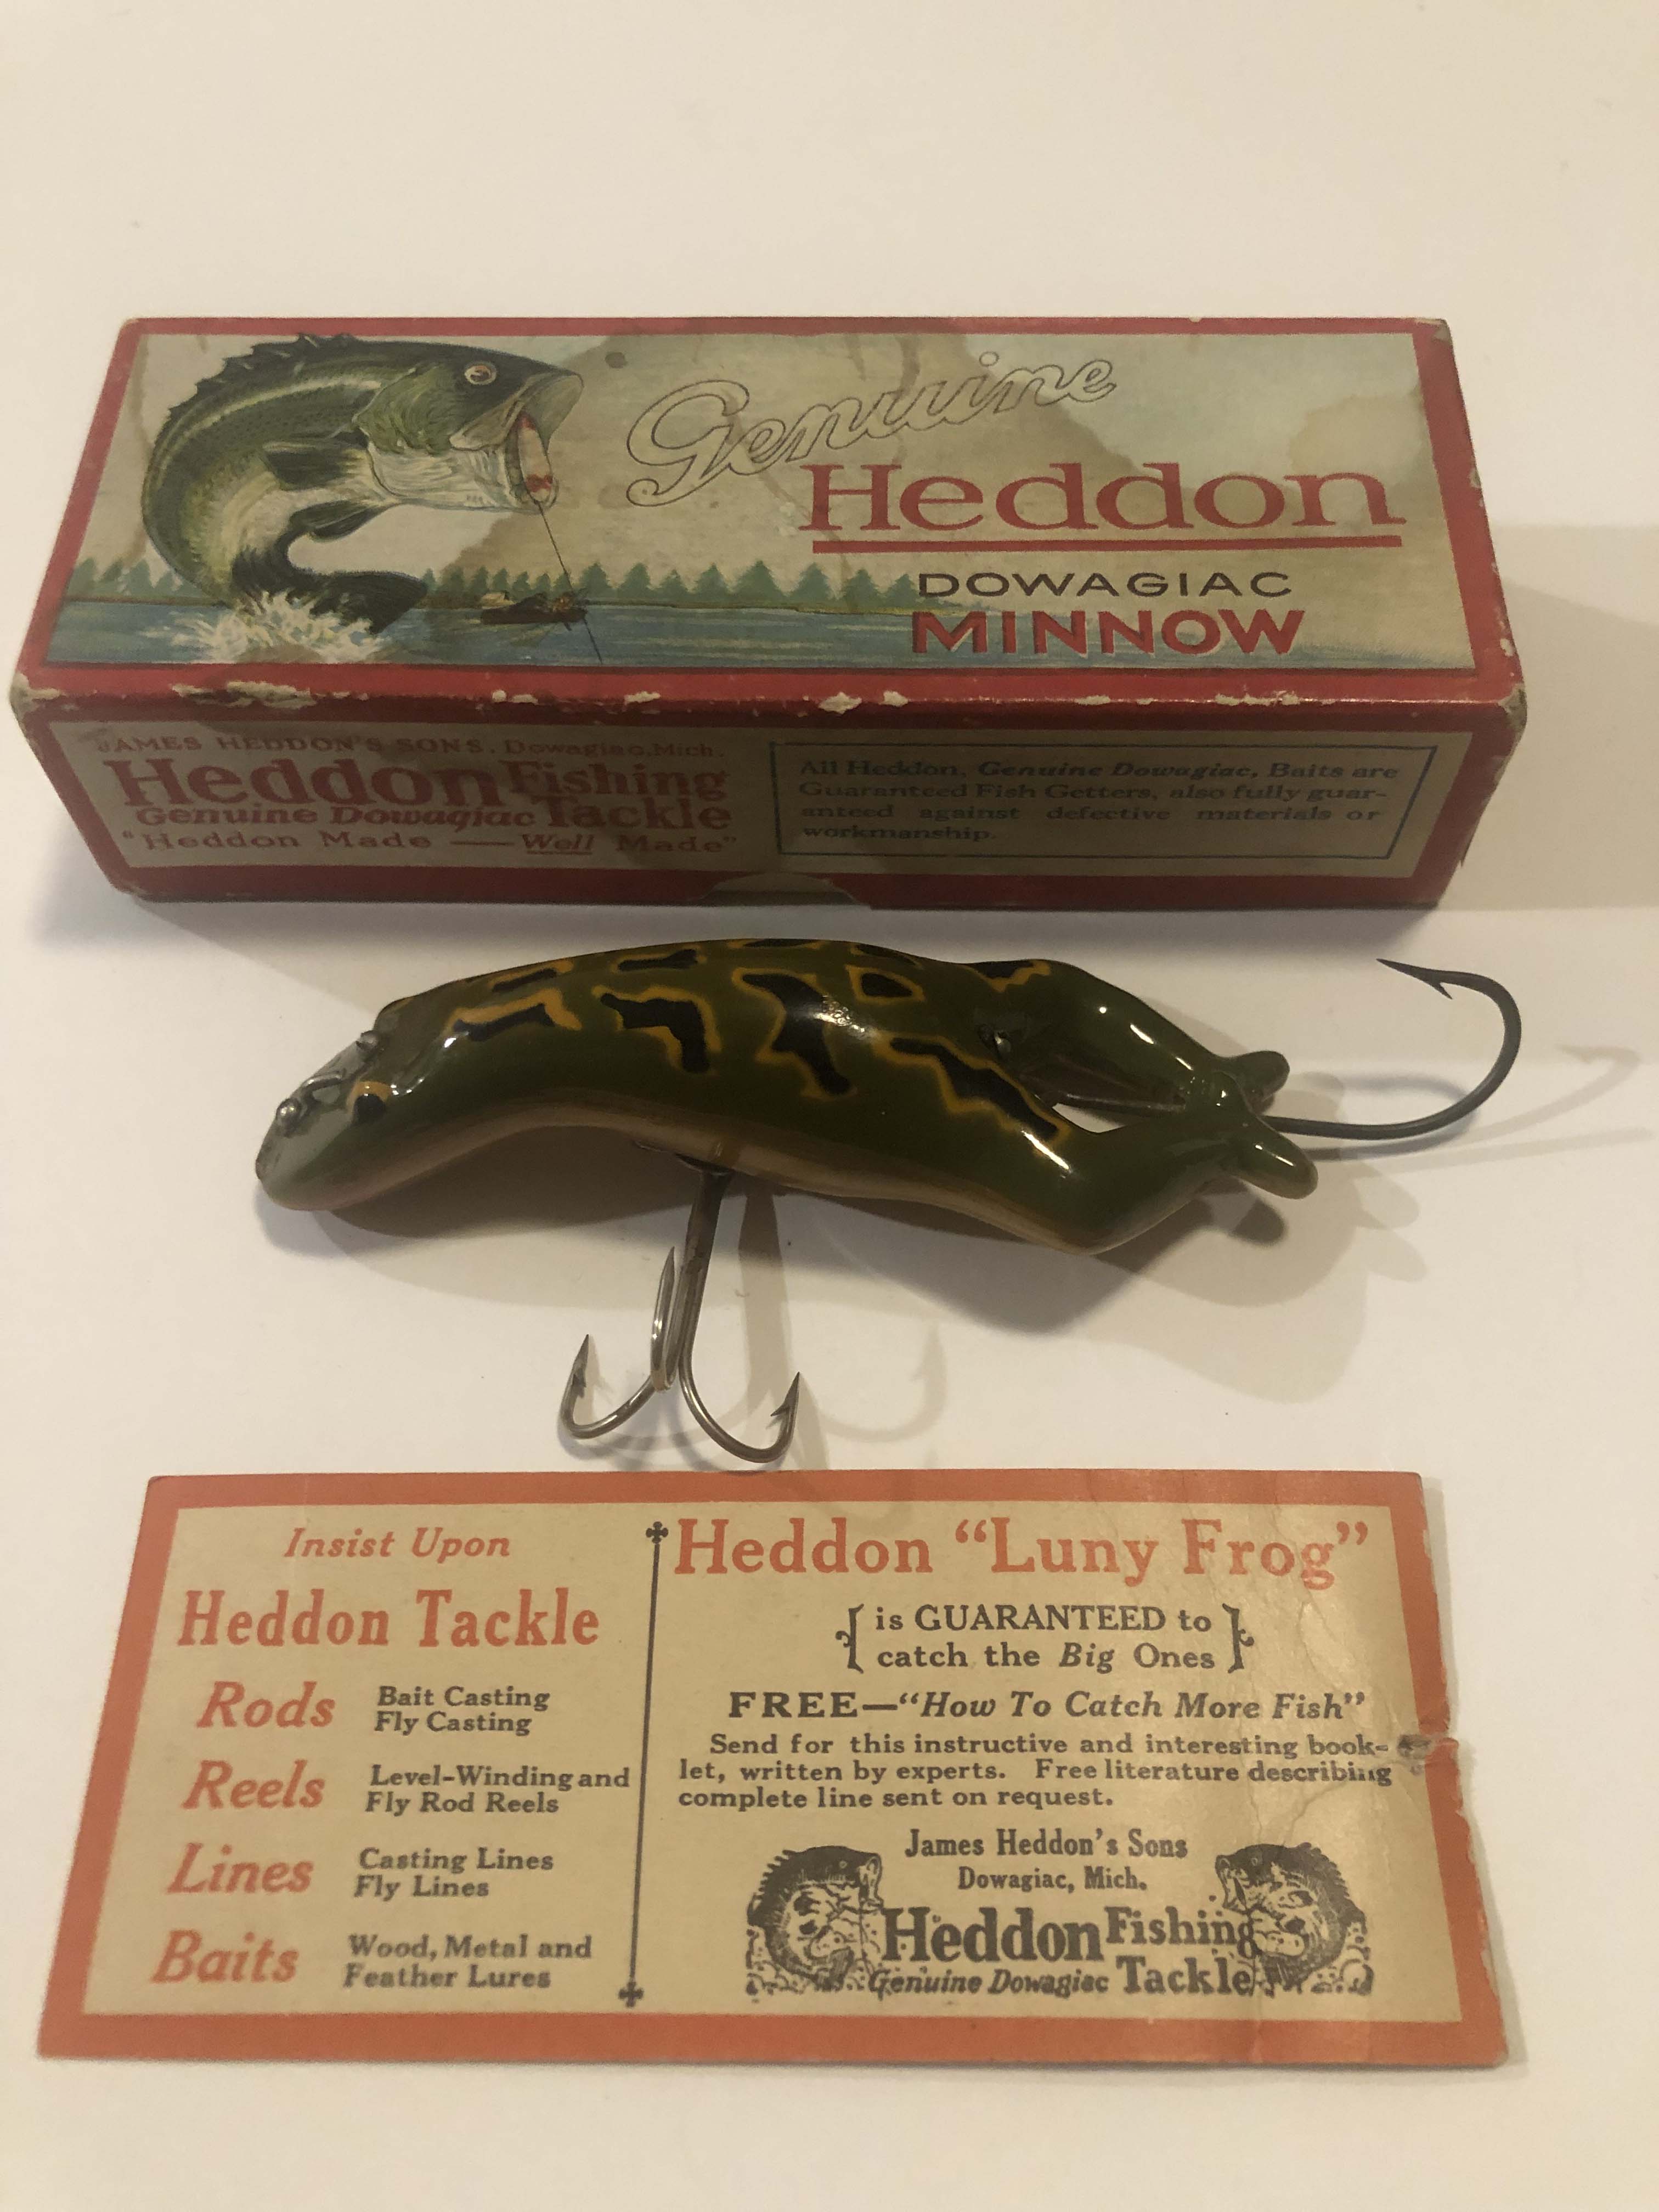 Great Heddon Luny Frog Lure/Box Combination | The Angling Marketplace